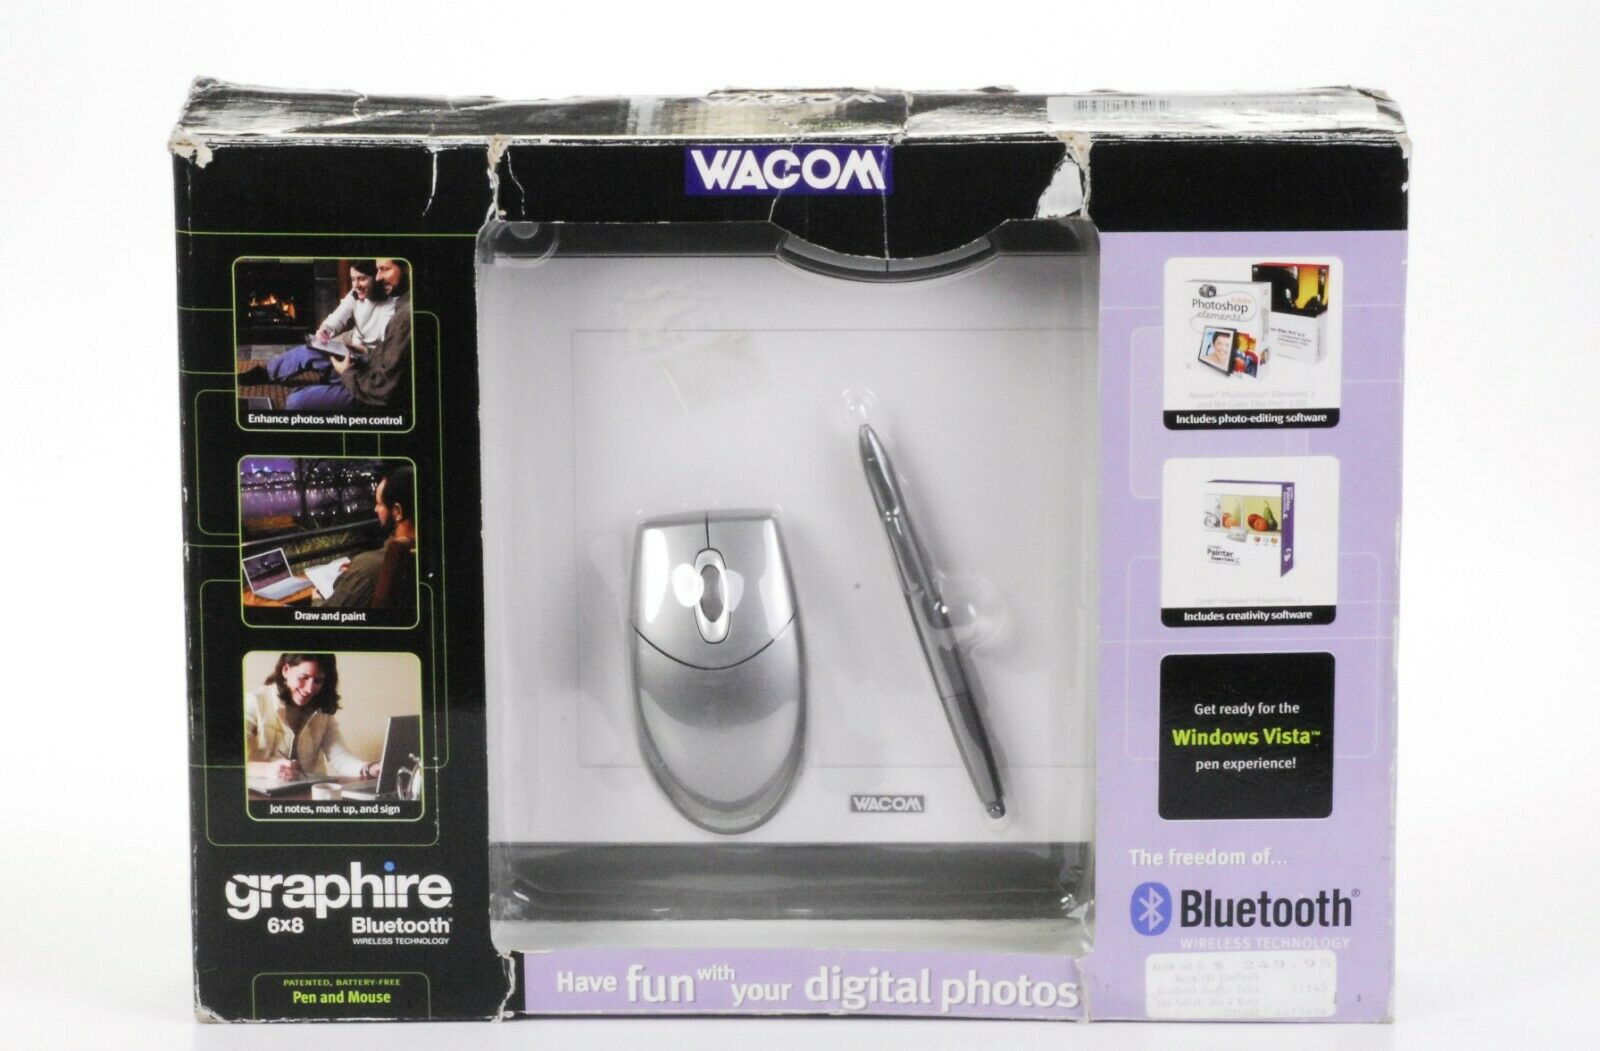 Wacom Graphire 6x8 BlueTooth Wireless USB Graphics Drawing Tablet - Mouse - Pen